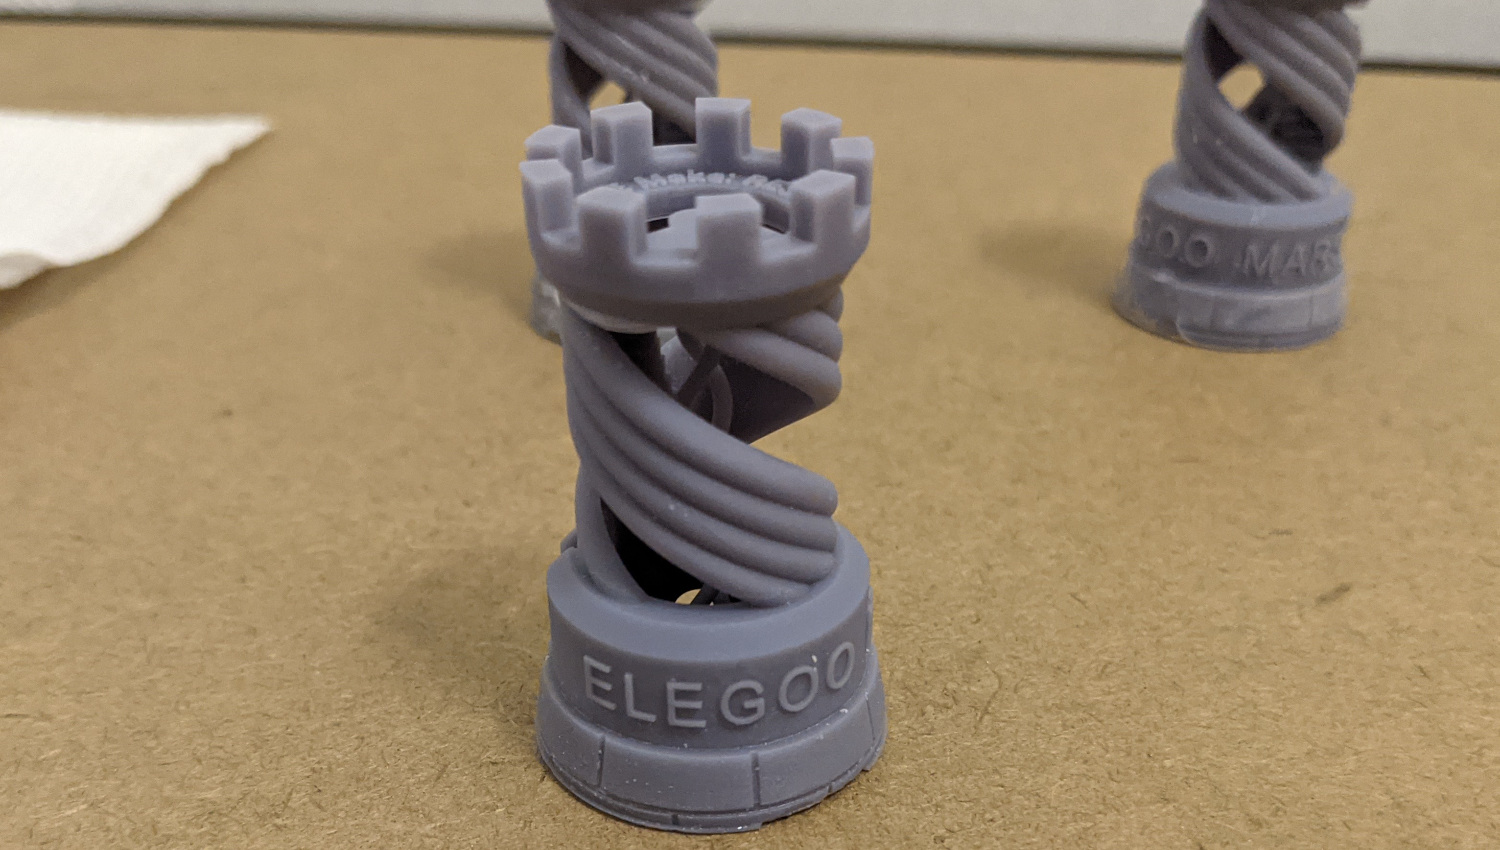 Elegoo Test Print with smooth surfaces and invisible layer lines